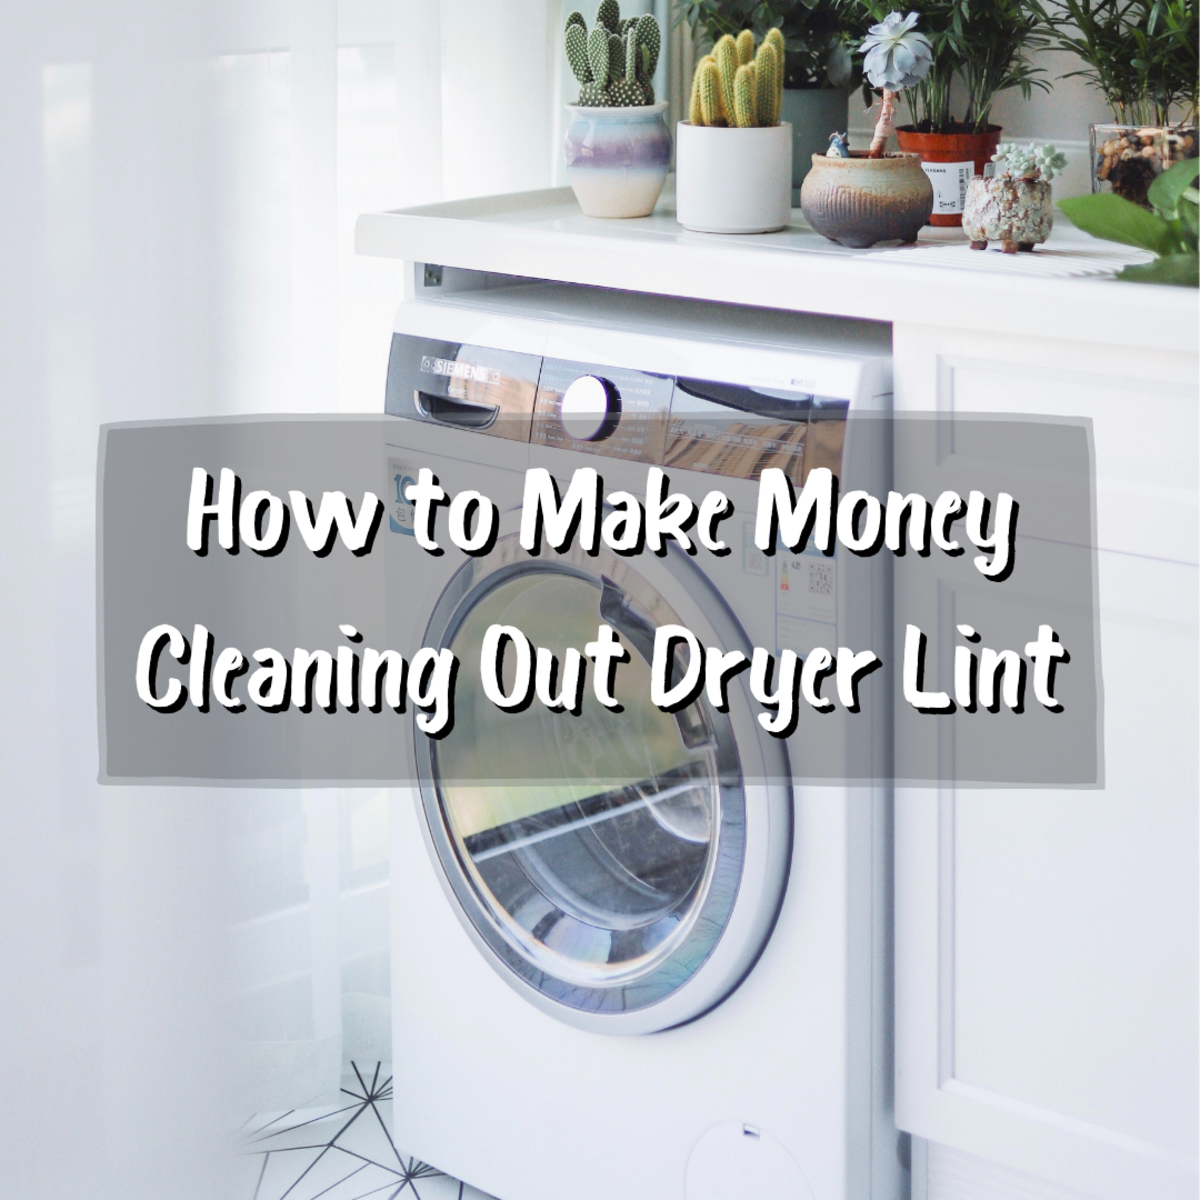 Read on to learn about dryer safety and how you might find a fistful of dollars while cleaning up your appliance.